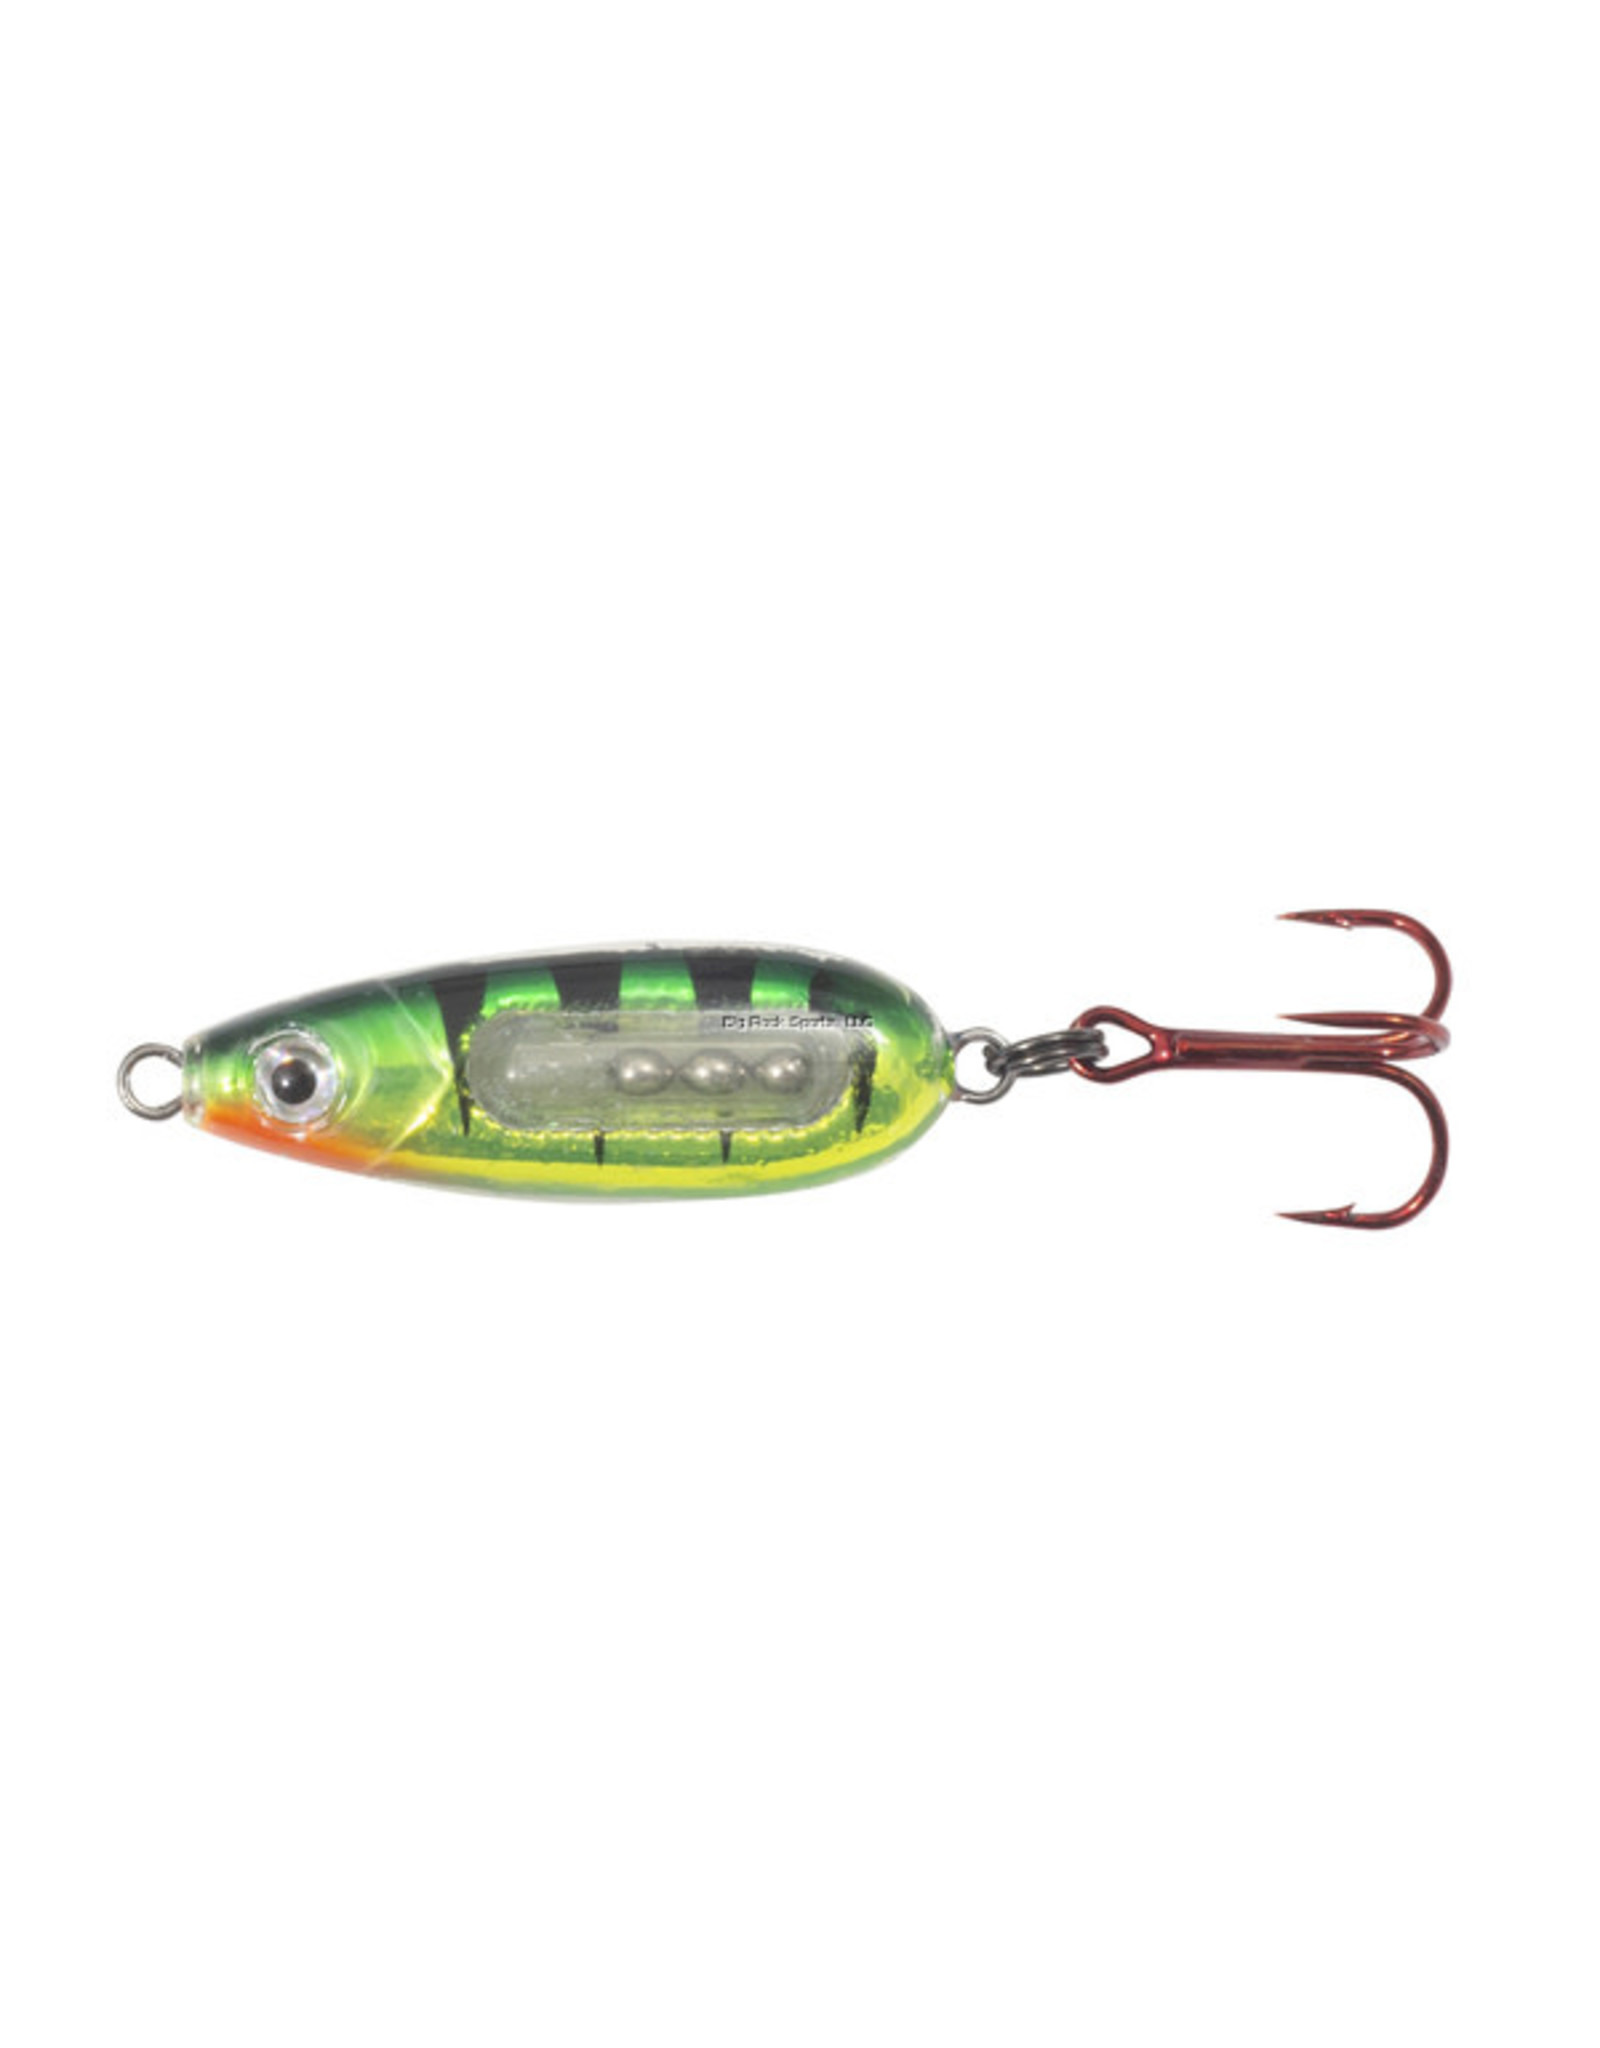 Northland Fishing Tackle Northland GBRS2-13 Glass Buck-Shot Spoon - 1/Card - 3/32oz - Glo White